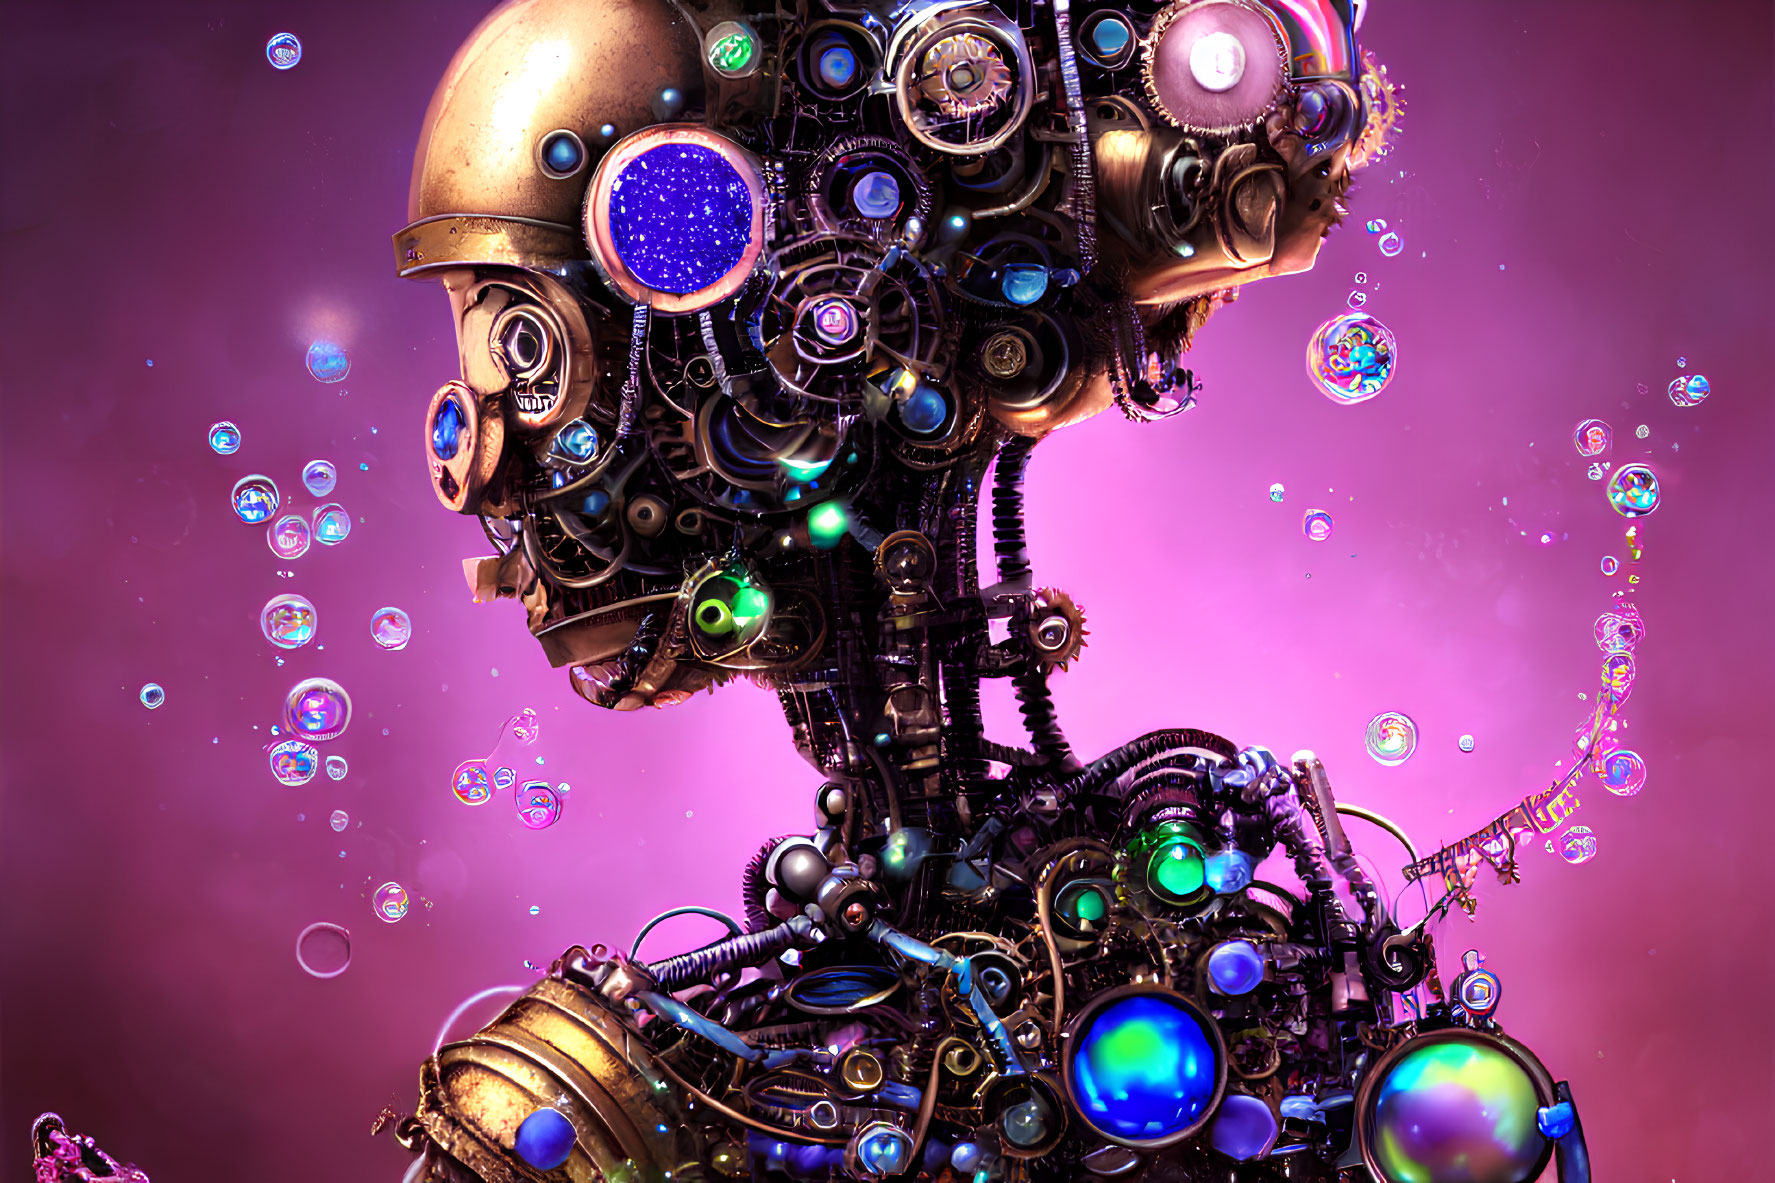 Steampunk-style robot head with glowing blue lights and iridescent bubbles on purple background